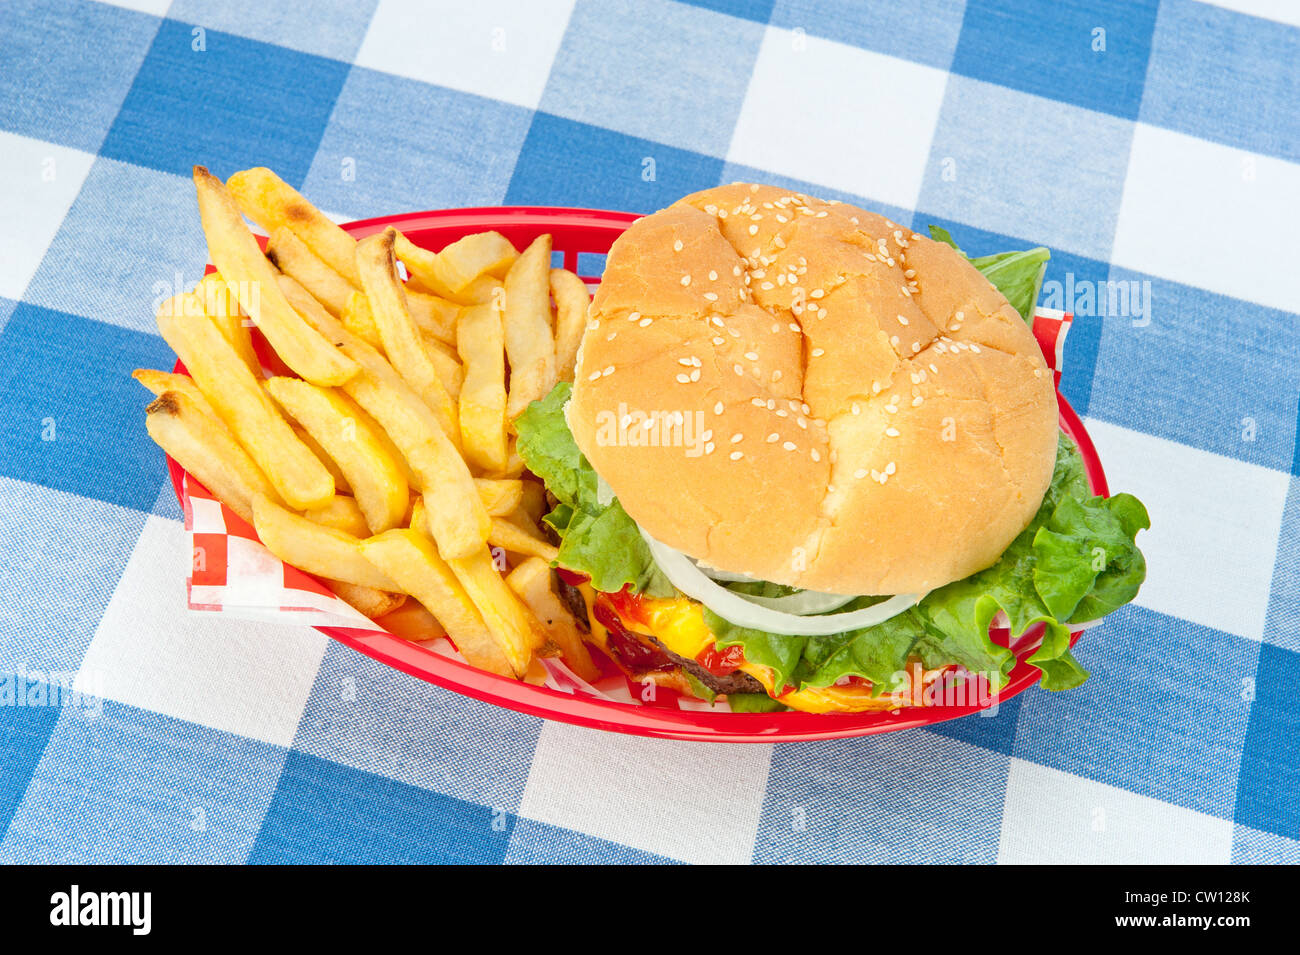 A top down view of a hamburger with fries in a red basket on a picnic tablecloth. Stock Photo